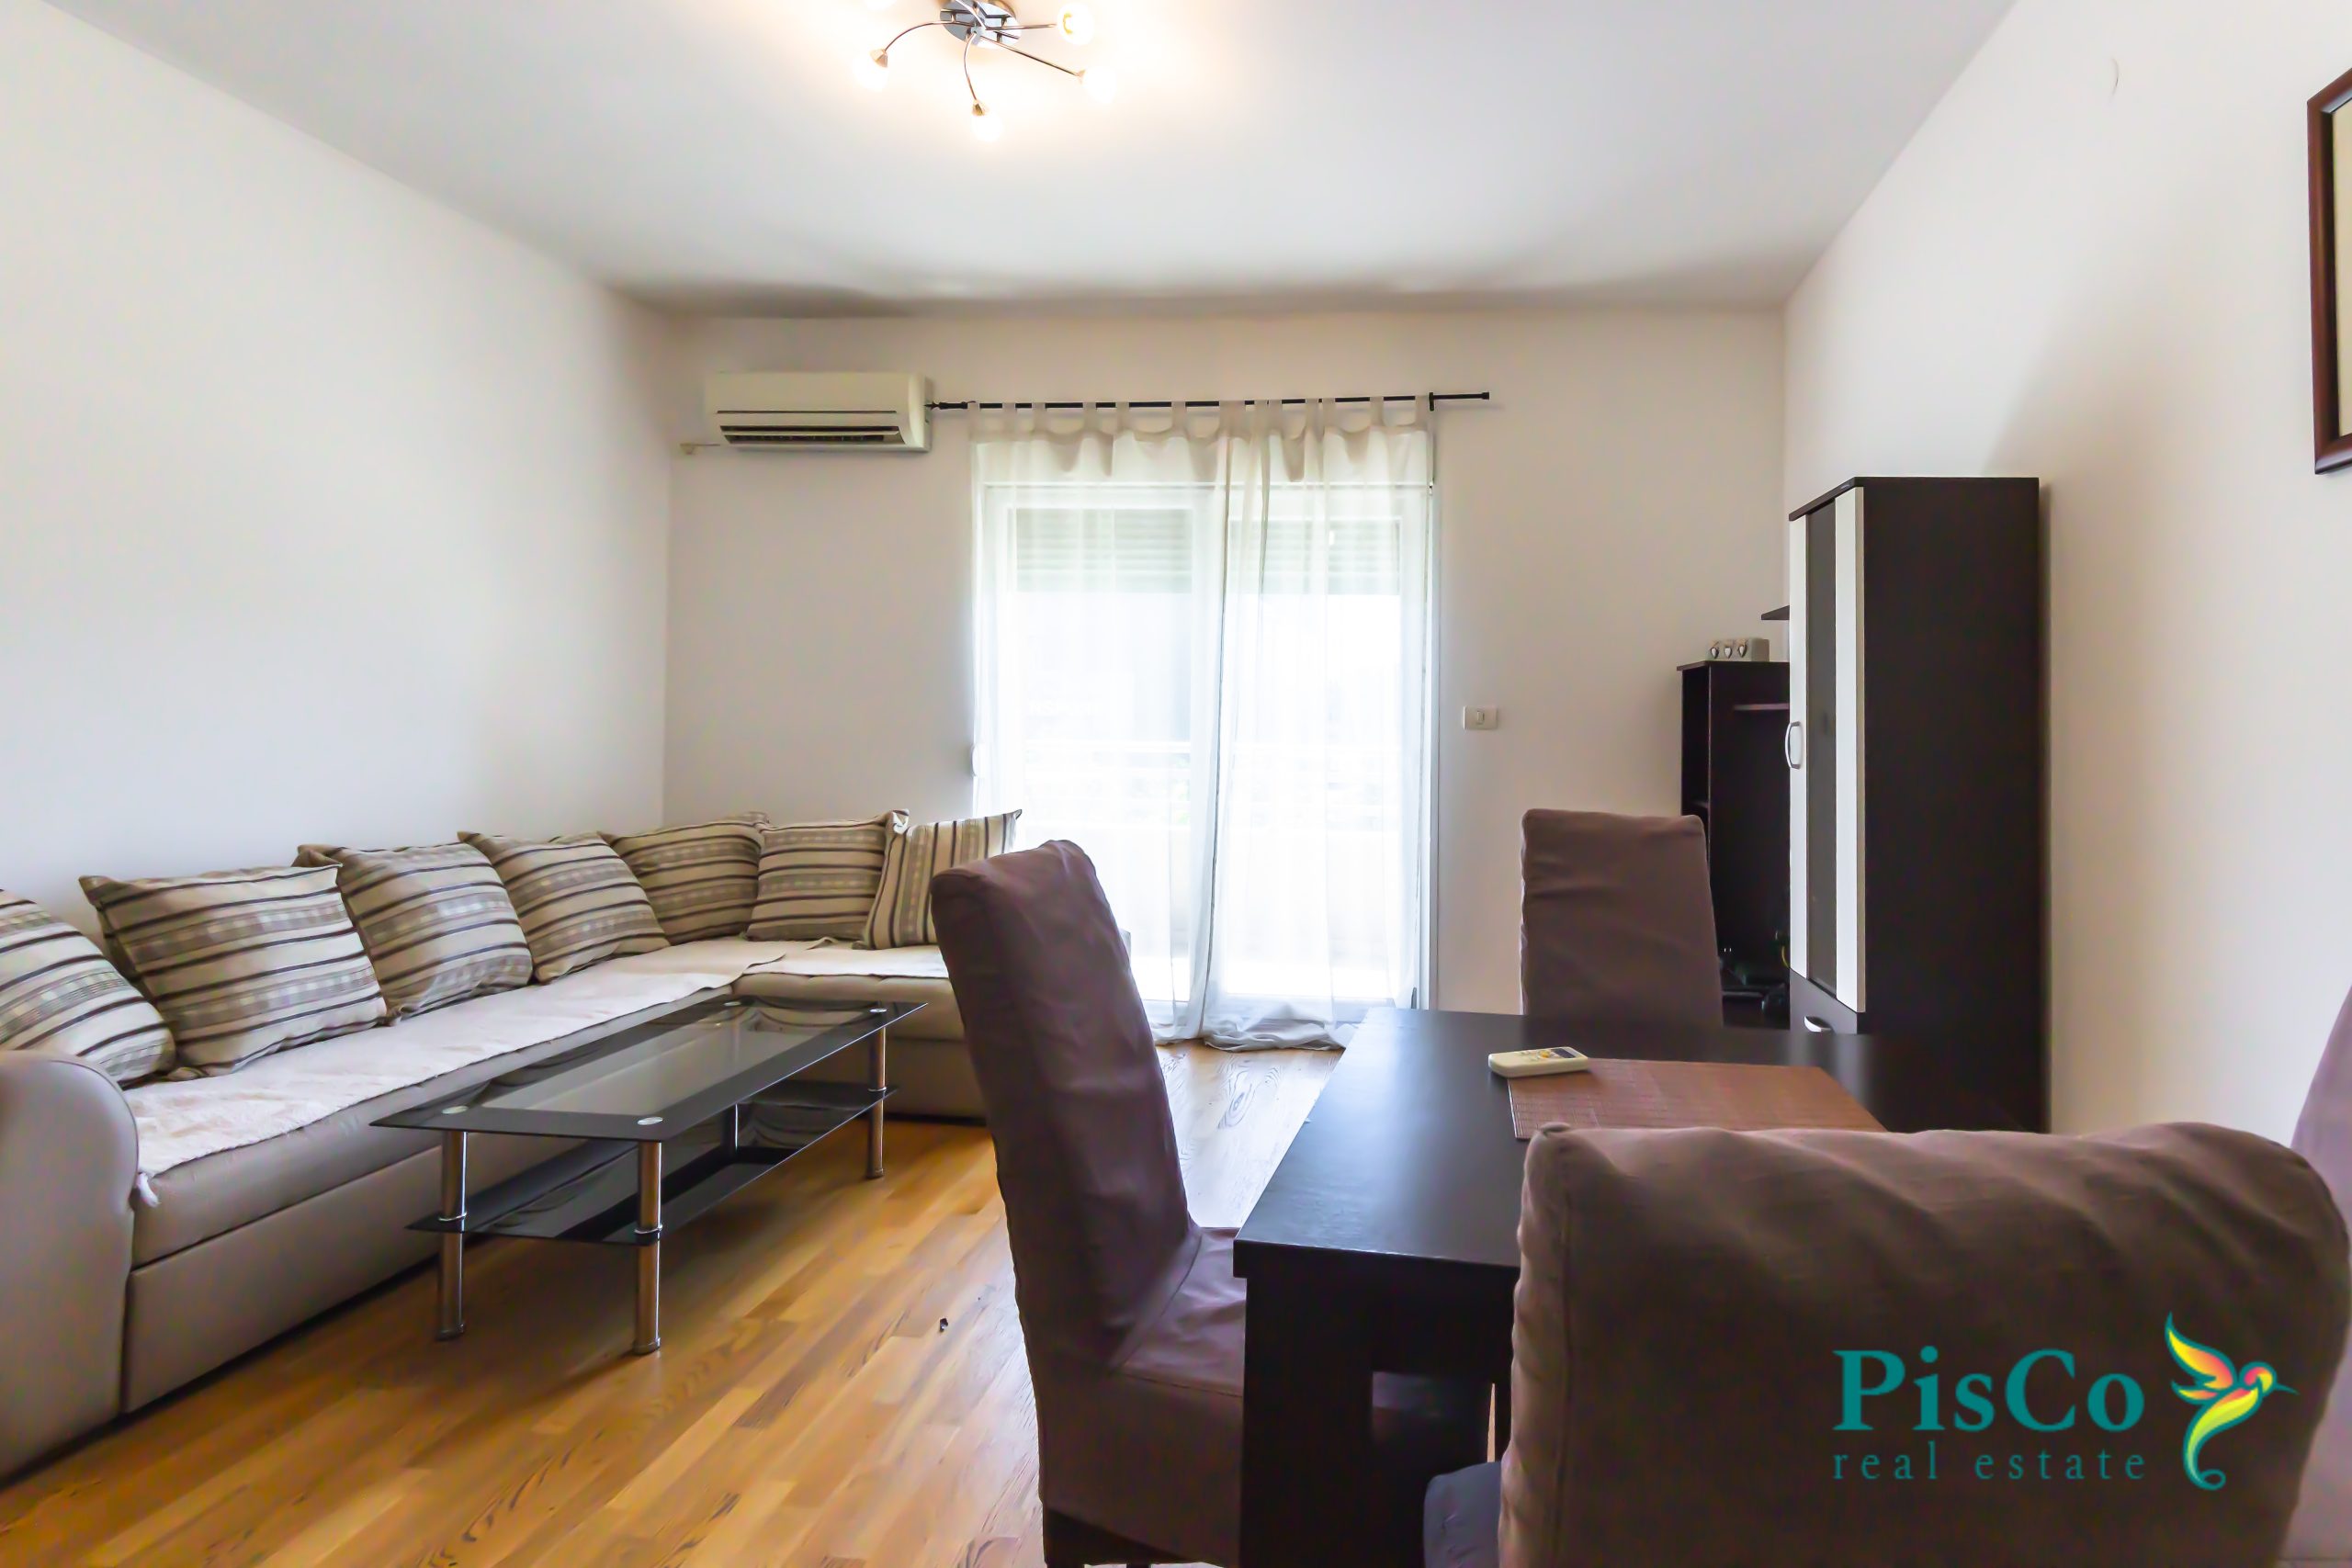 A 33m2 studio apartment for rent in the City district with a garage space